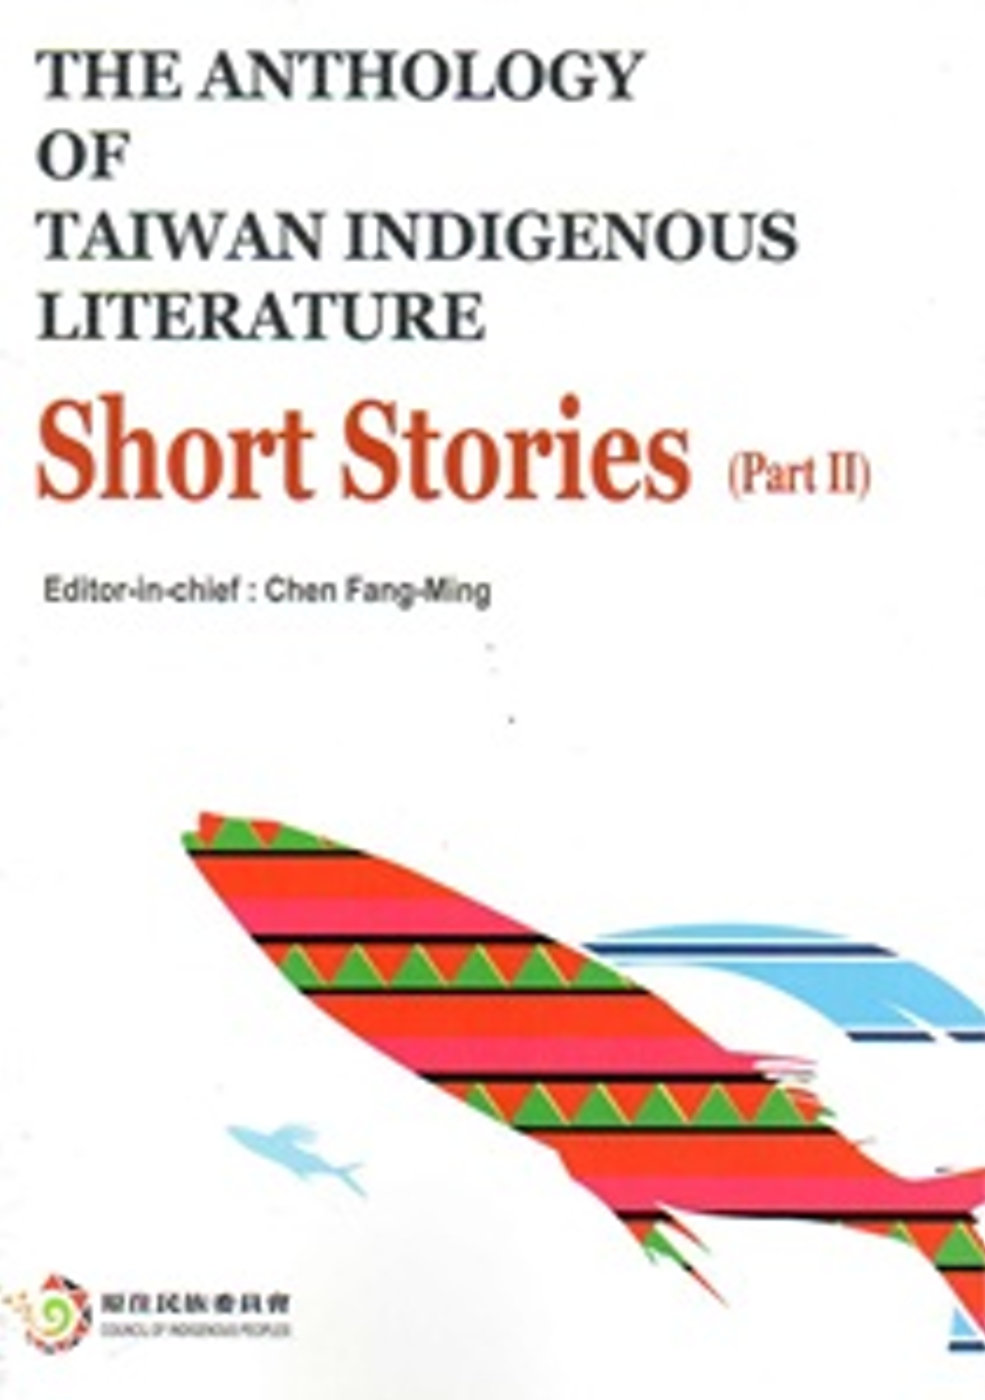 THE ANTHOLOGY OF TAIWAN INDIGENOUS LITERATURE：Short Stories PartII